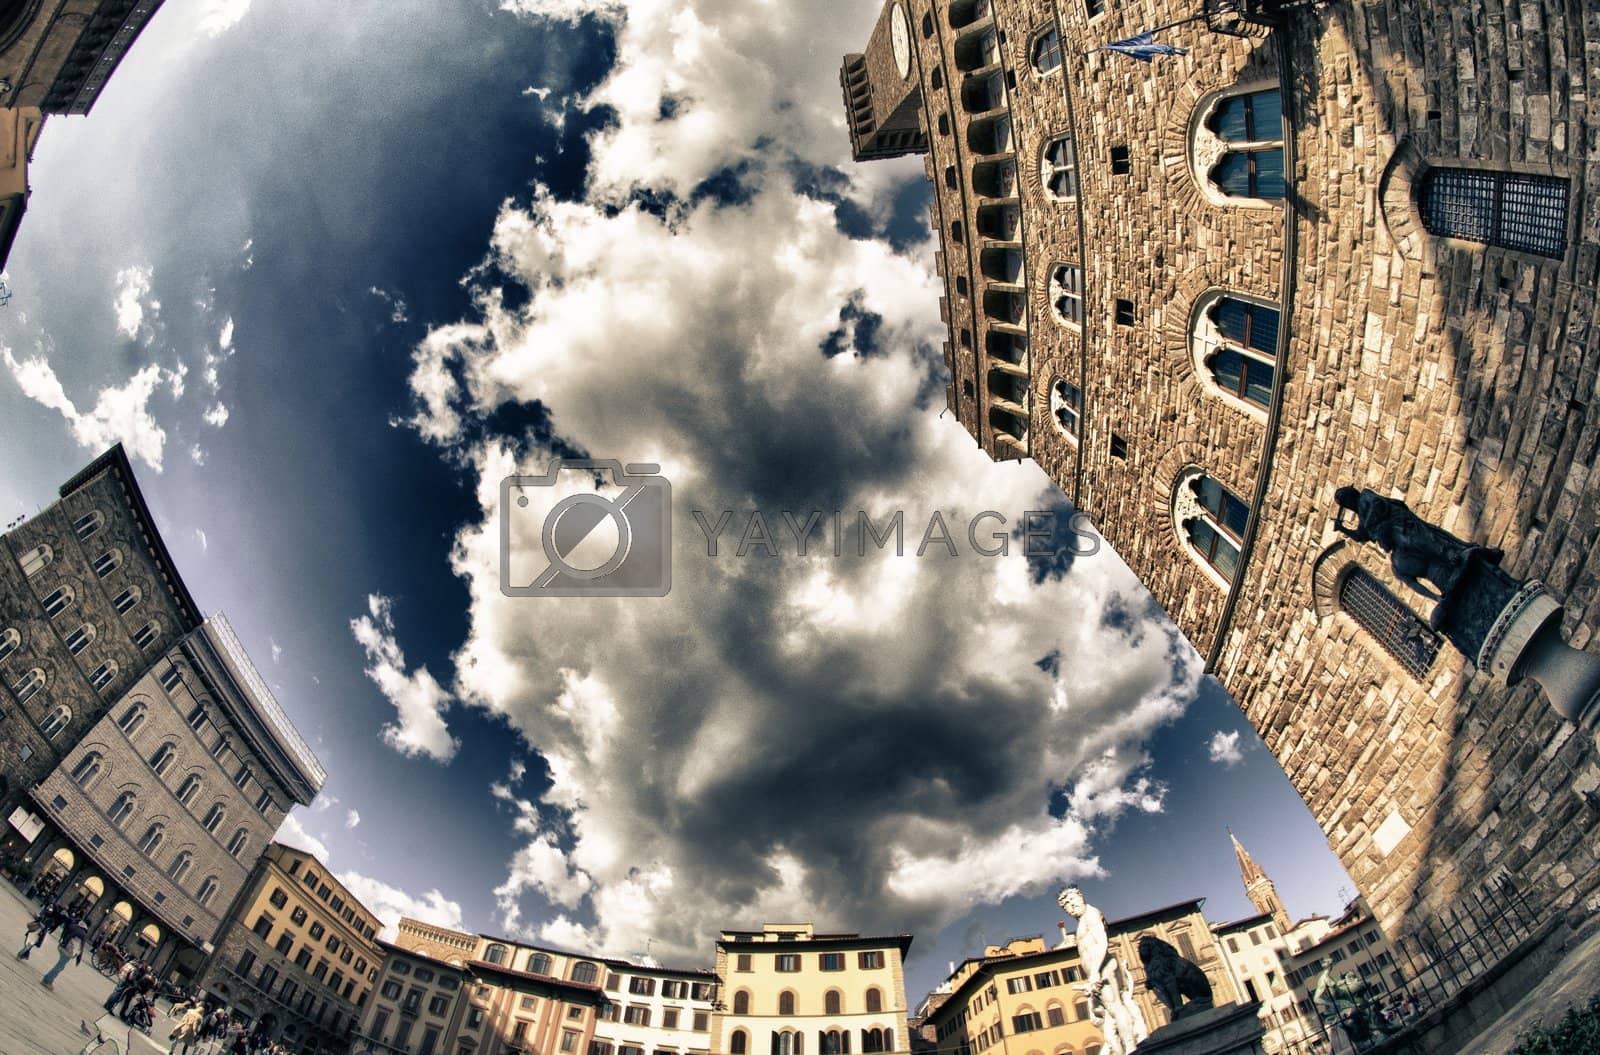 Royalty free image of Piazza della Signoria in Florence, Italy by jovannig